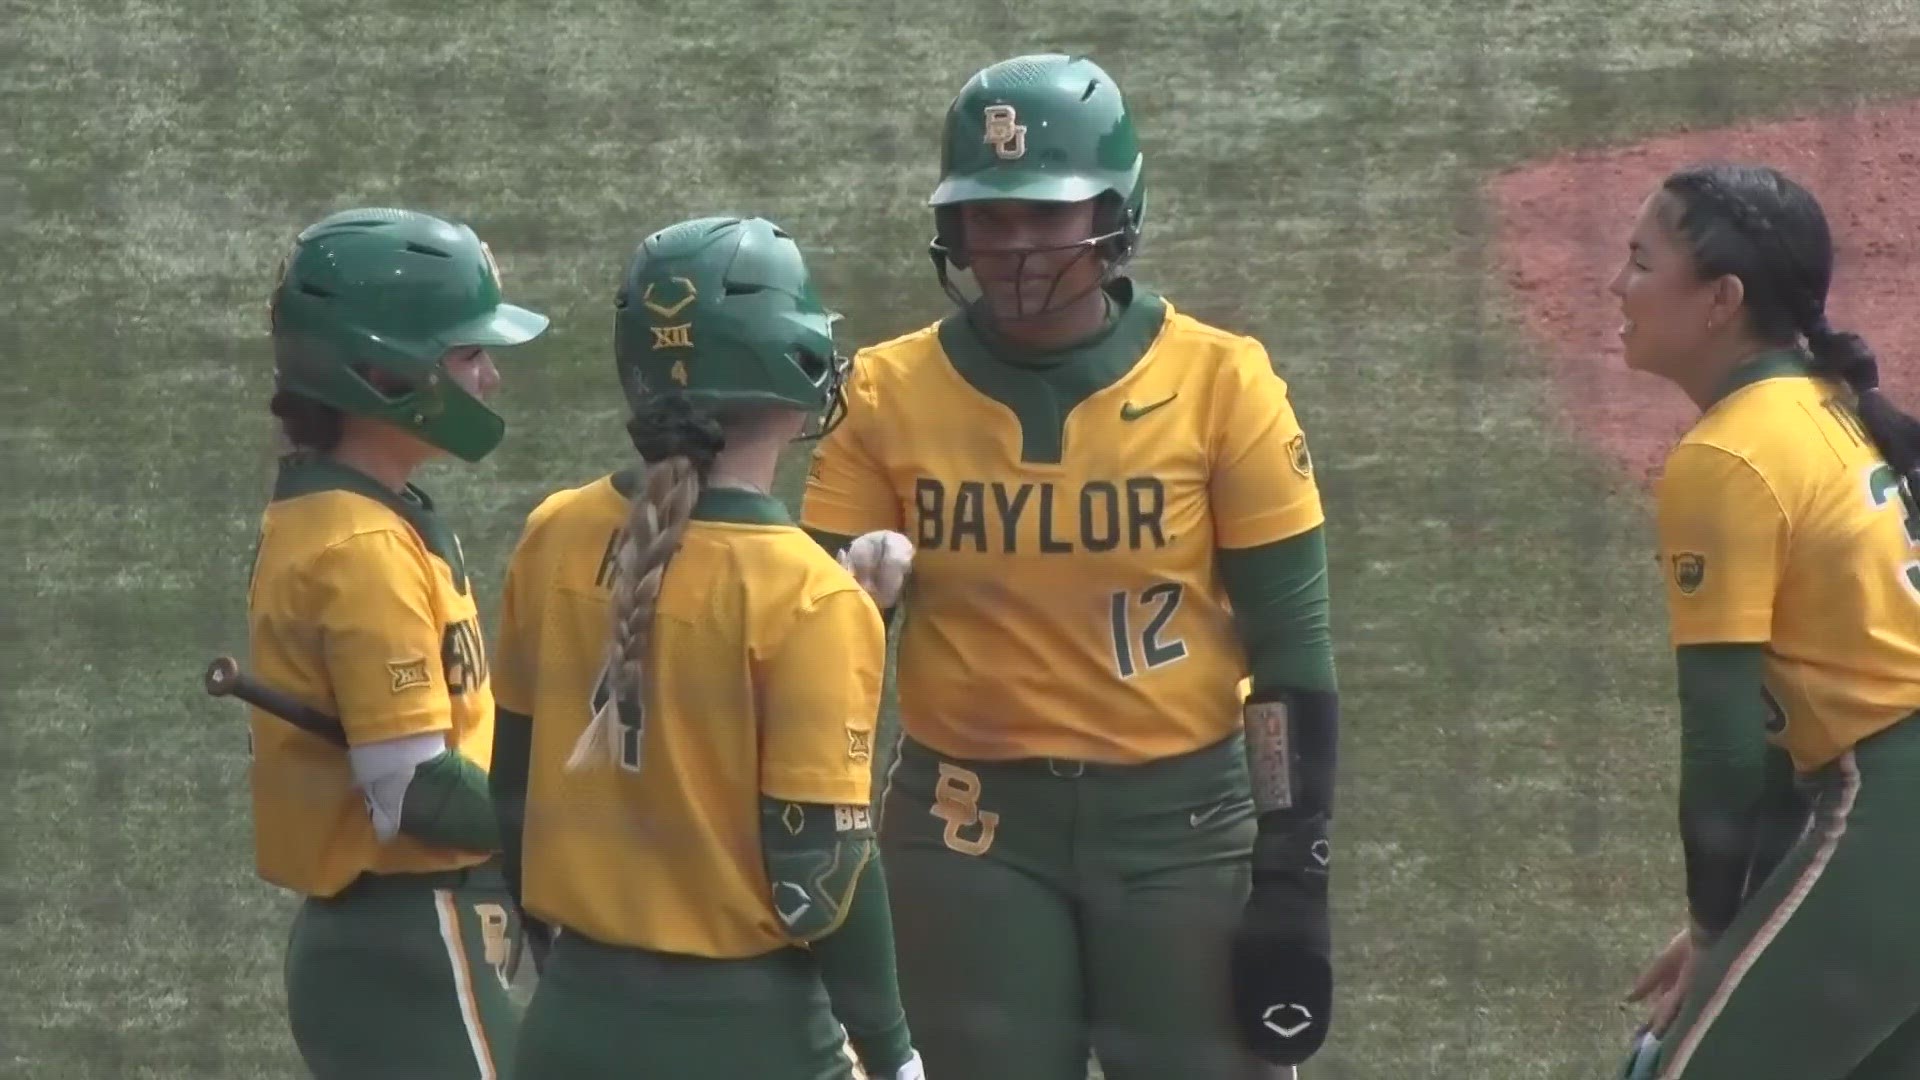 Shaylon Govan became the 11th All-American in Baylor softball history.